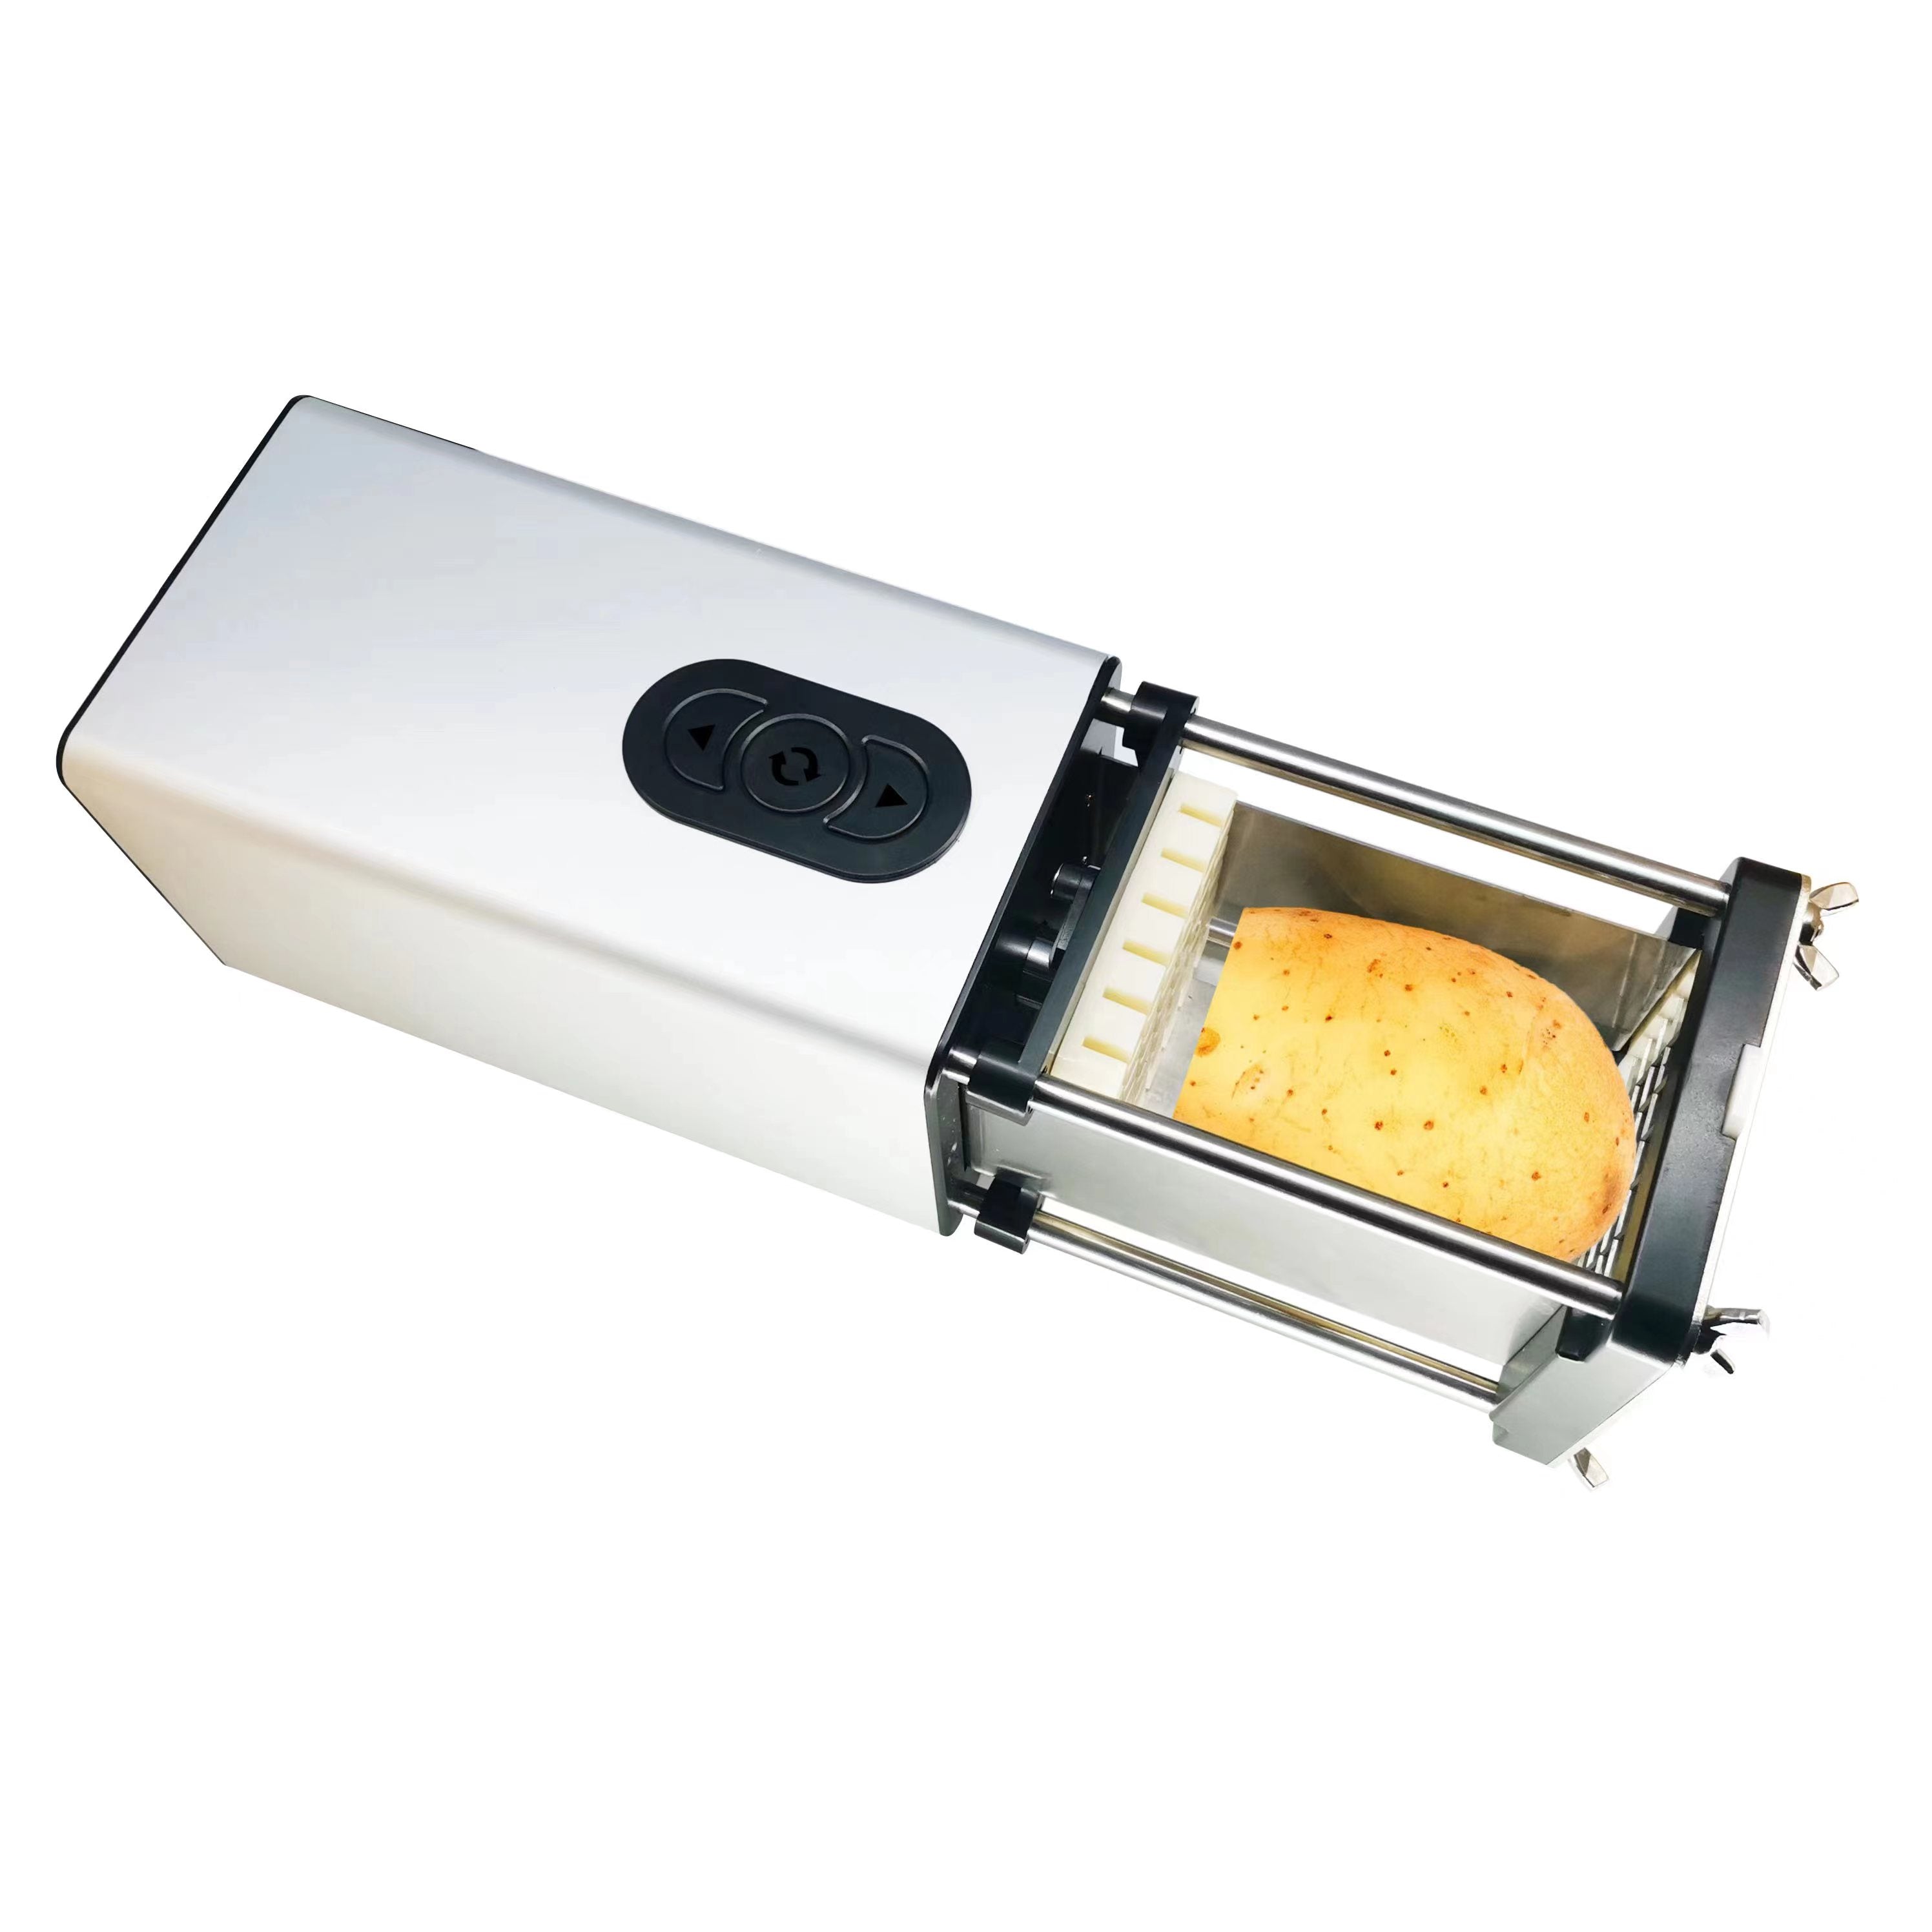 Electric French Fry Cutter - Stainless Steel Vegetable Potato Carrot Slicer